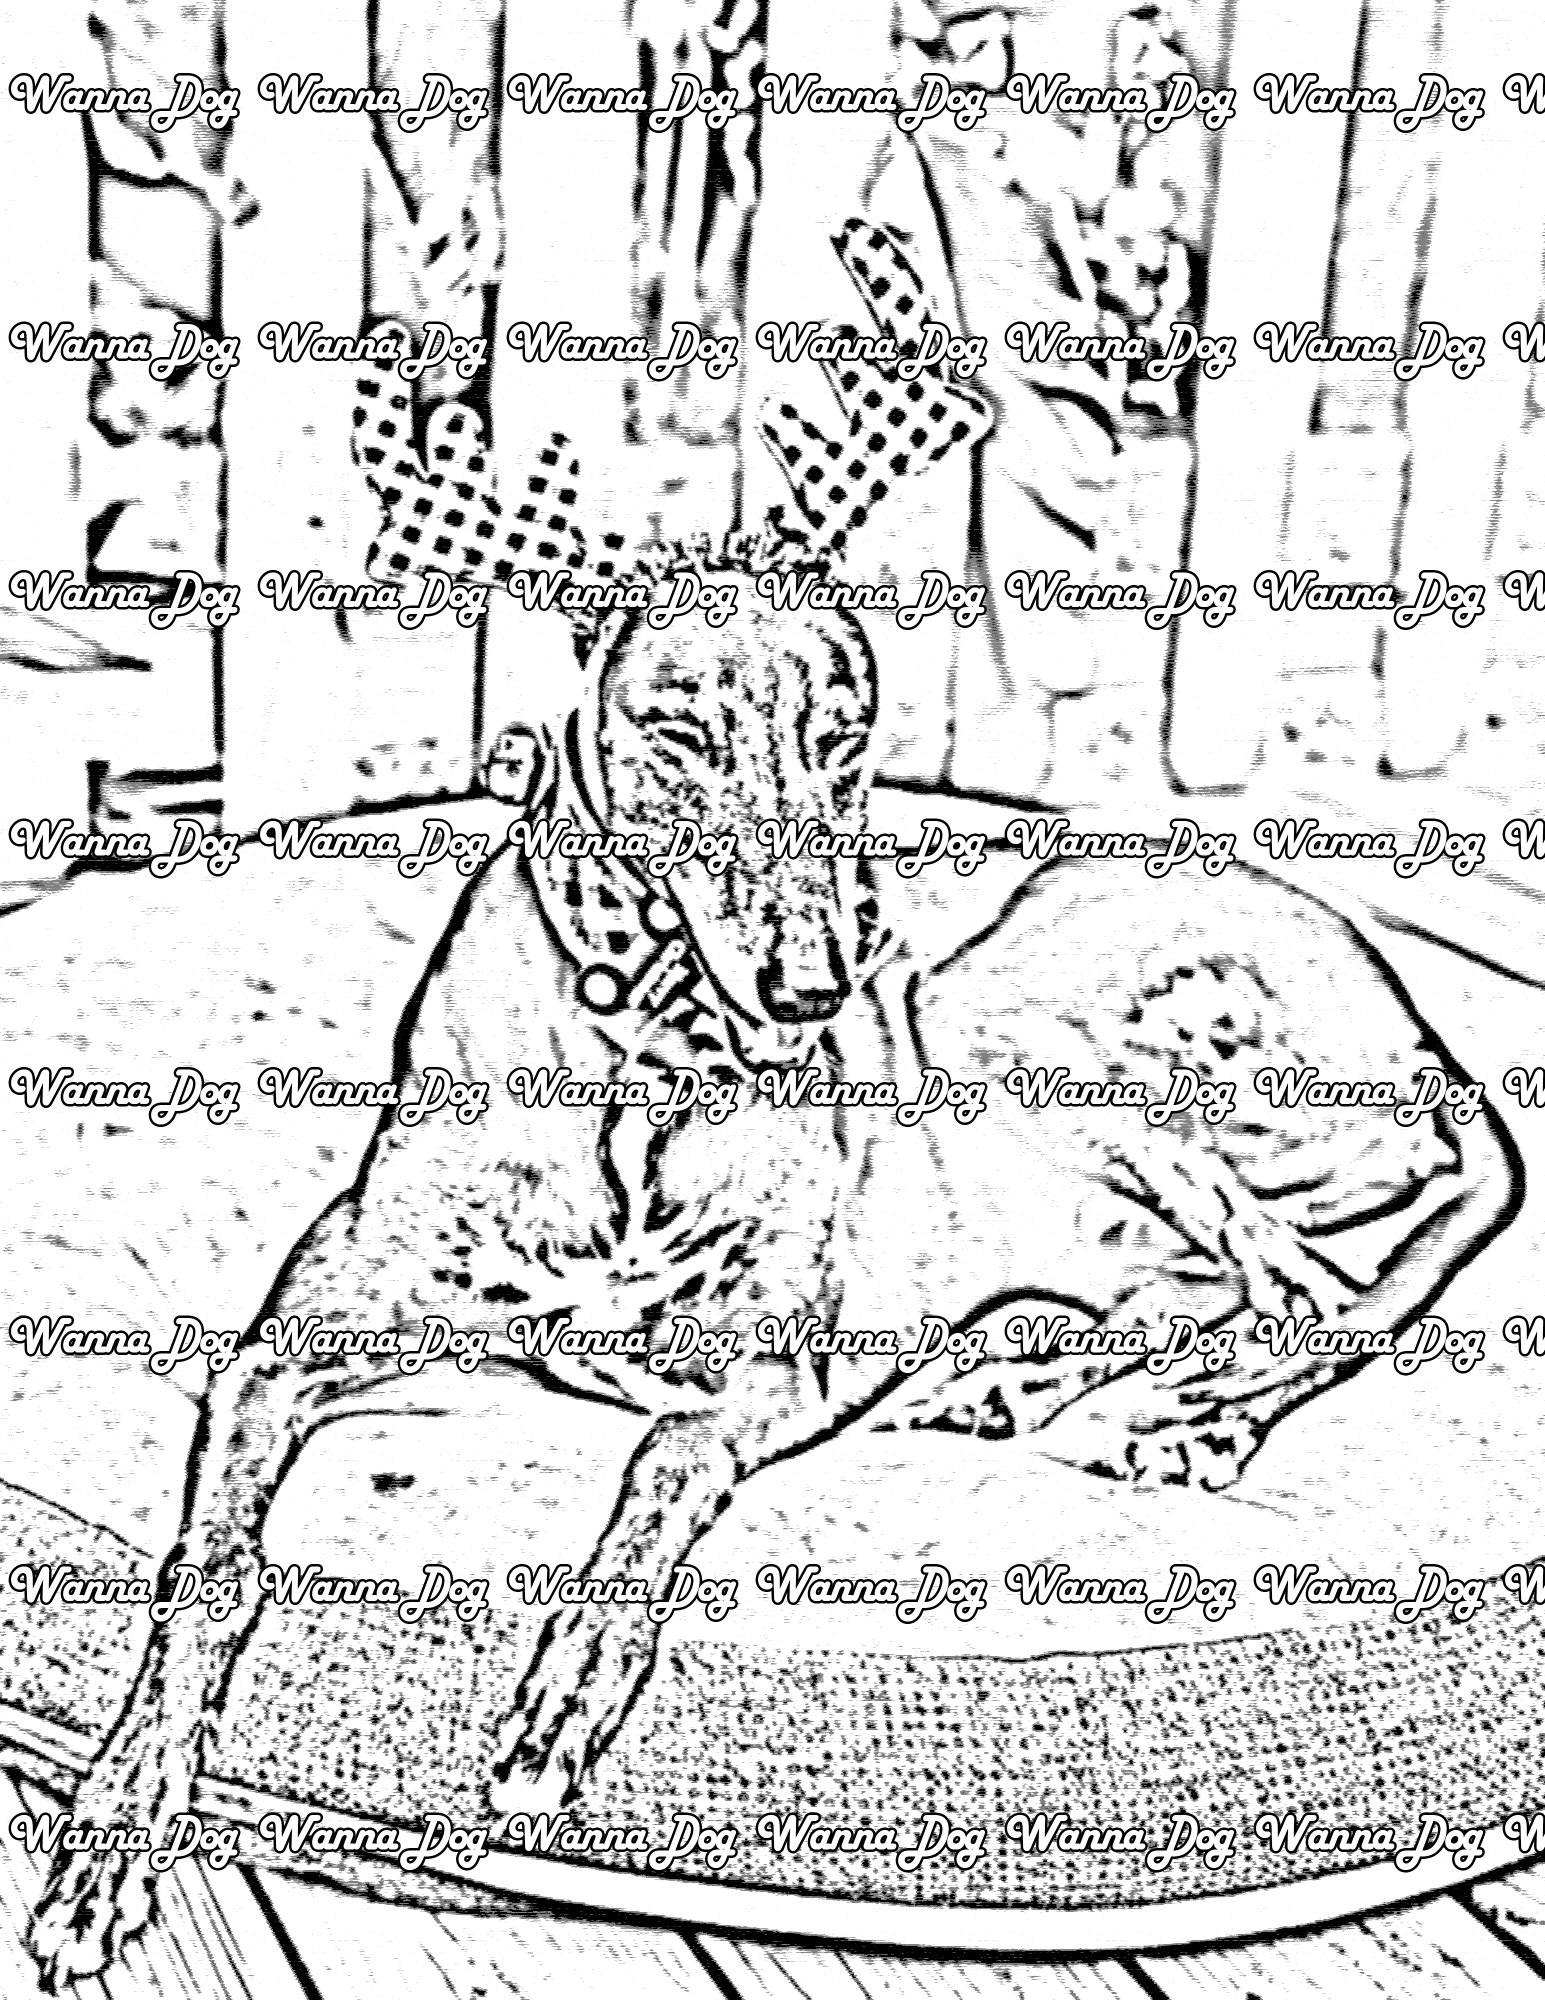 Greyhound Coloring Page of a Greyhound sitting in a Christmas costume